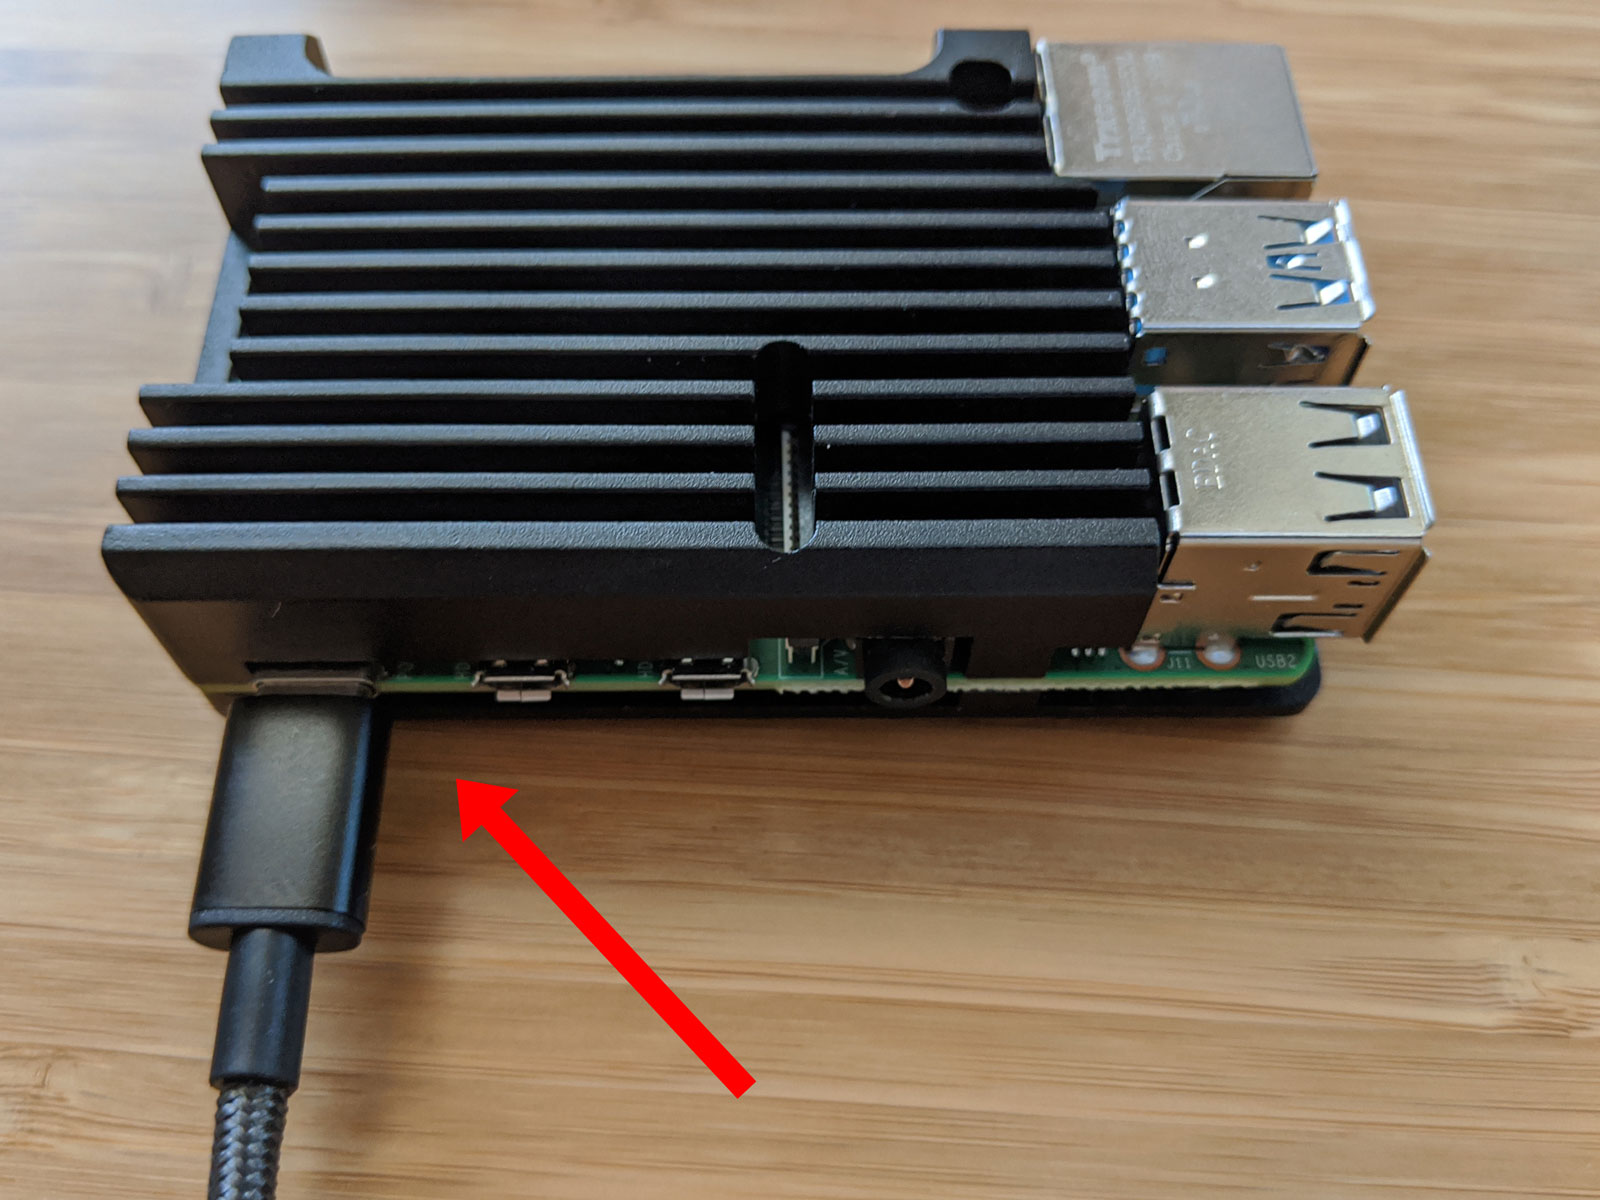 USB connection to Raspberry Pi